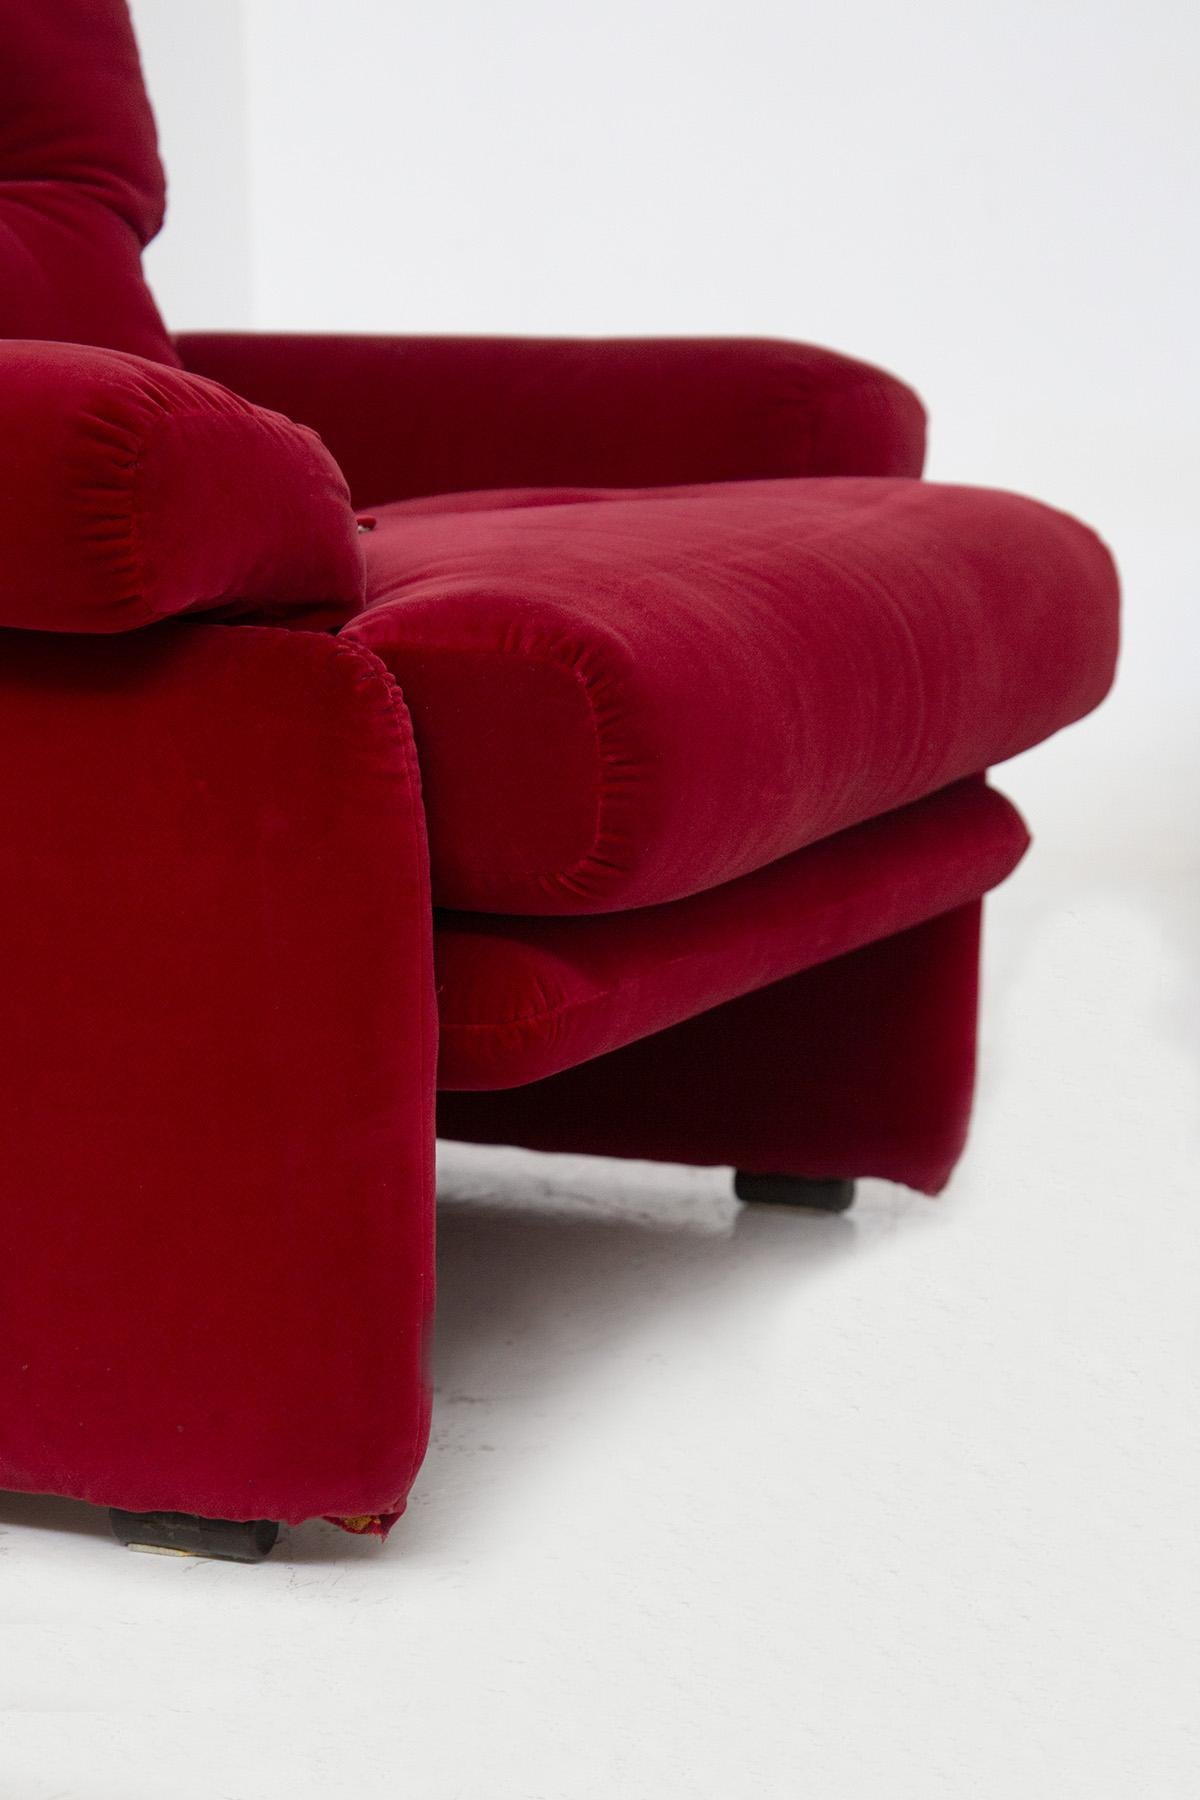 Afra and Tobia Scarpa Vintage Armchairs Mod. 